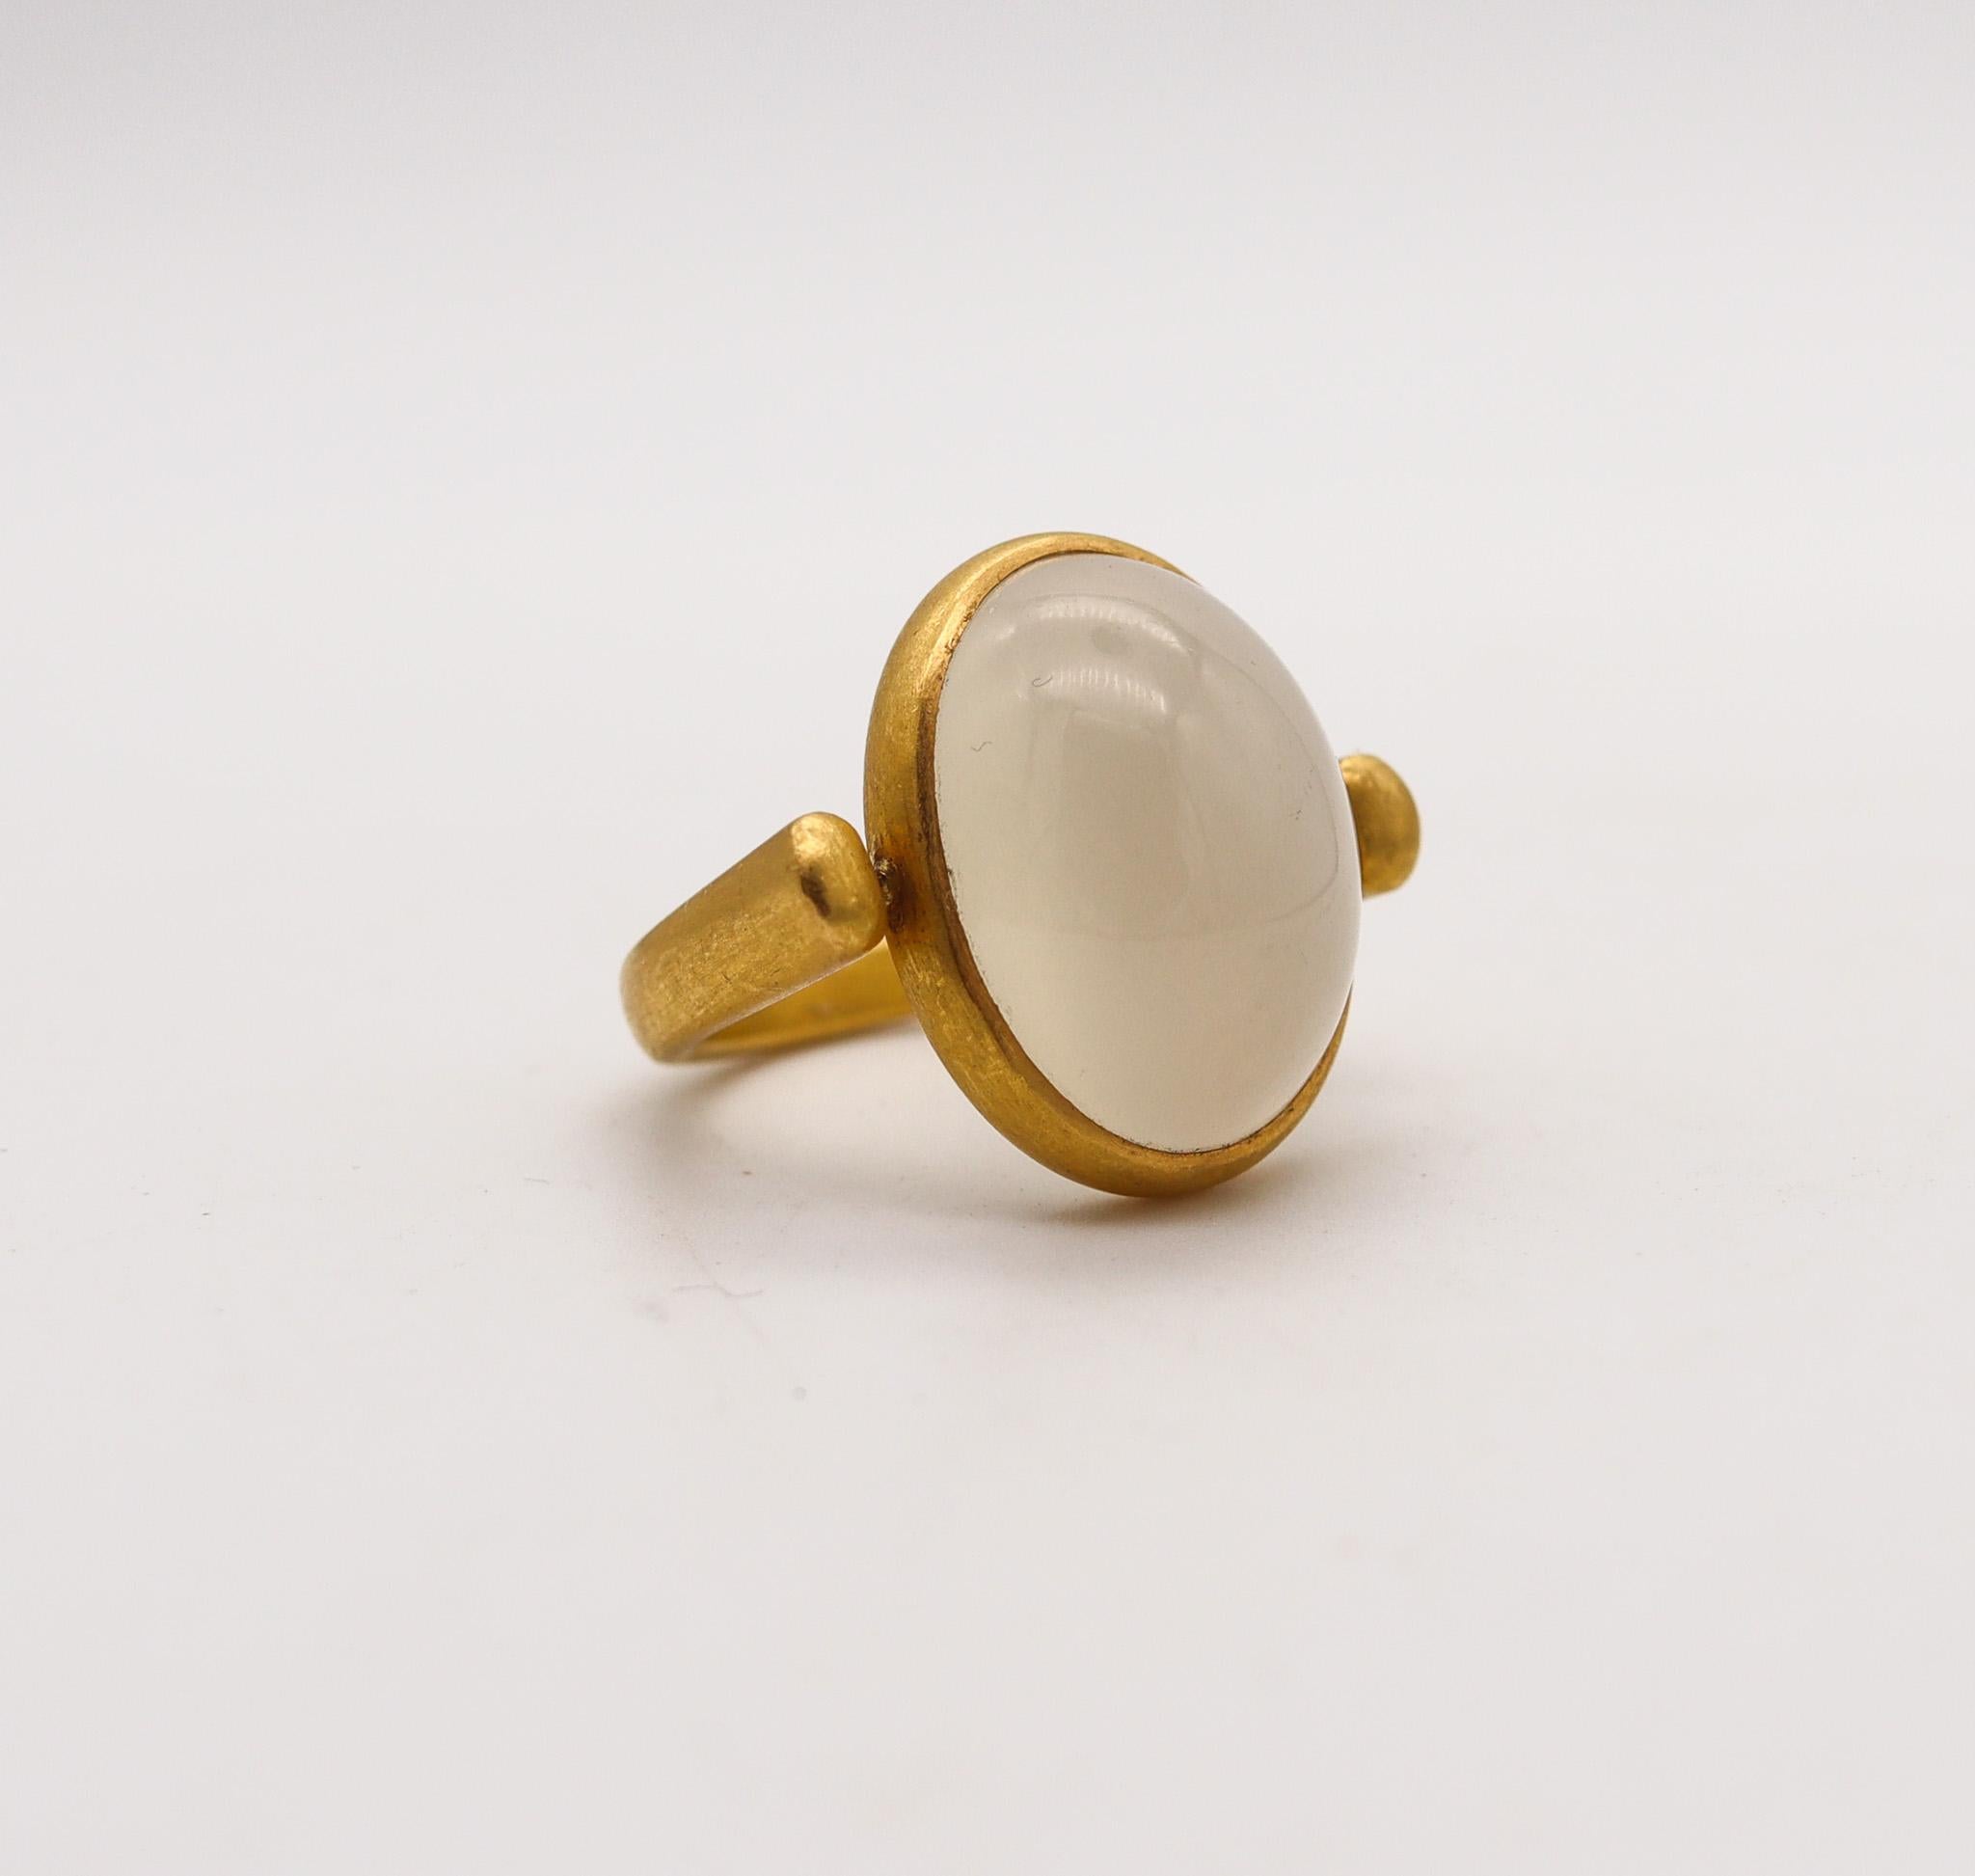 Roman revival style signet ring with moonstone.

A statement signet ring, crafted in solid yellow gold of 18 karats with brushed finish. The ring has been designed in Italy in the ancient Roman style, with a swivel to flip the main gemstone. Mount